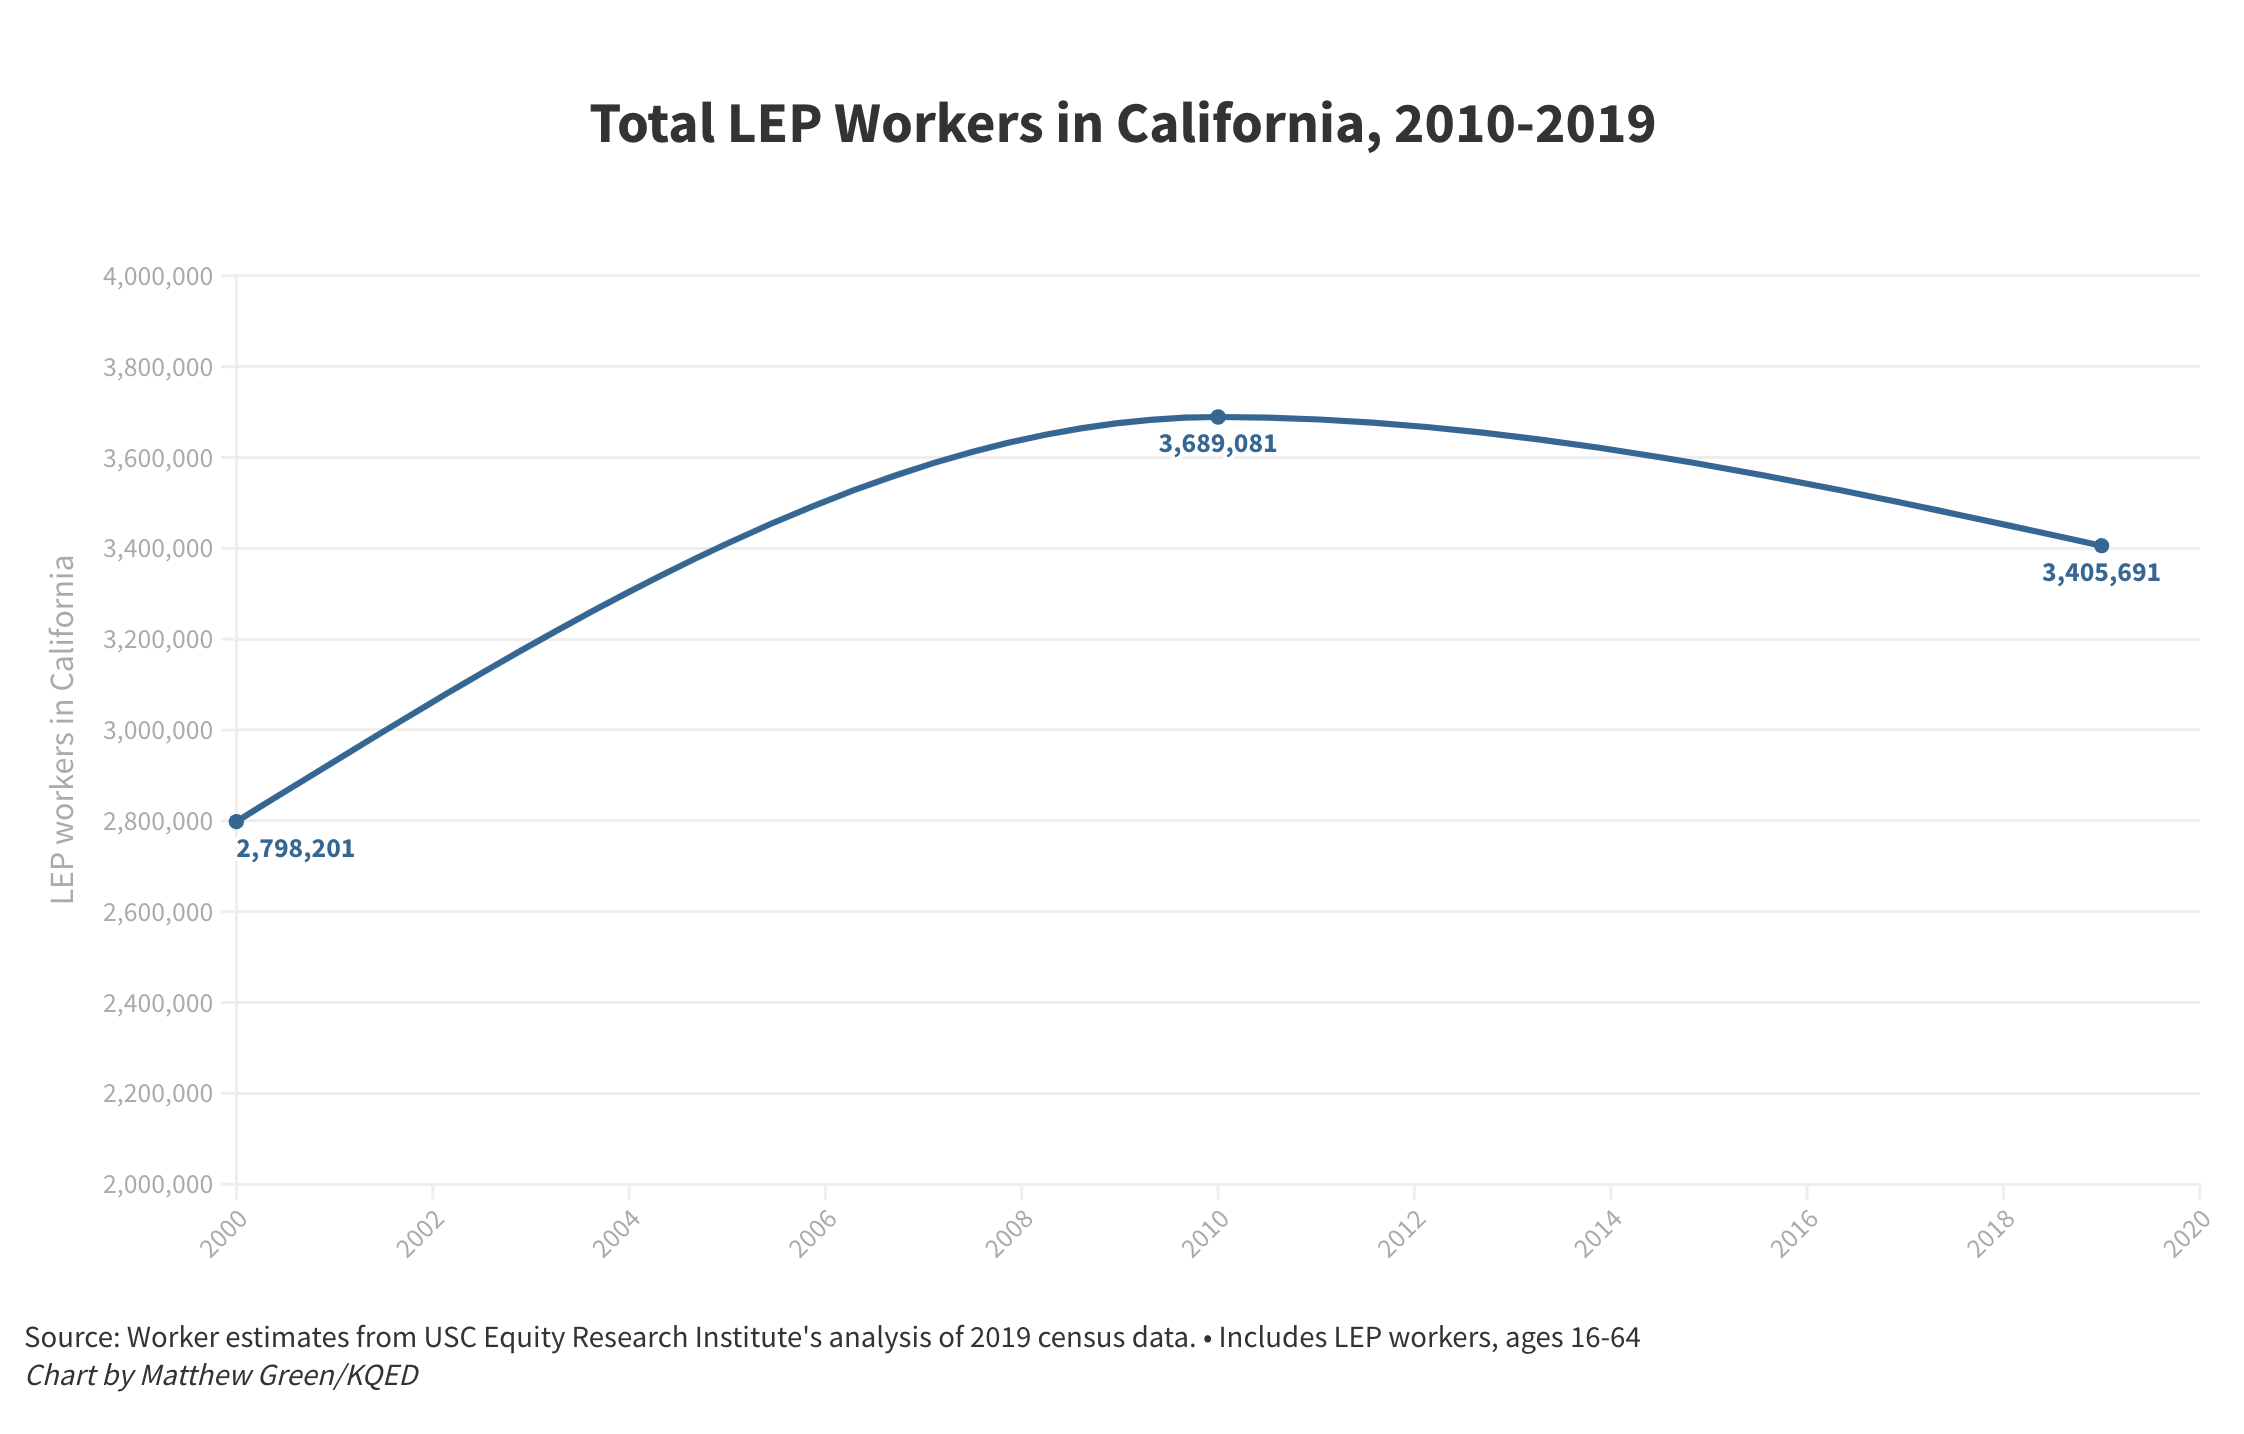 Line chart showing the estimated total number of LEP workers in California, 2010-2019